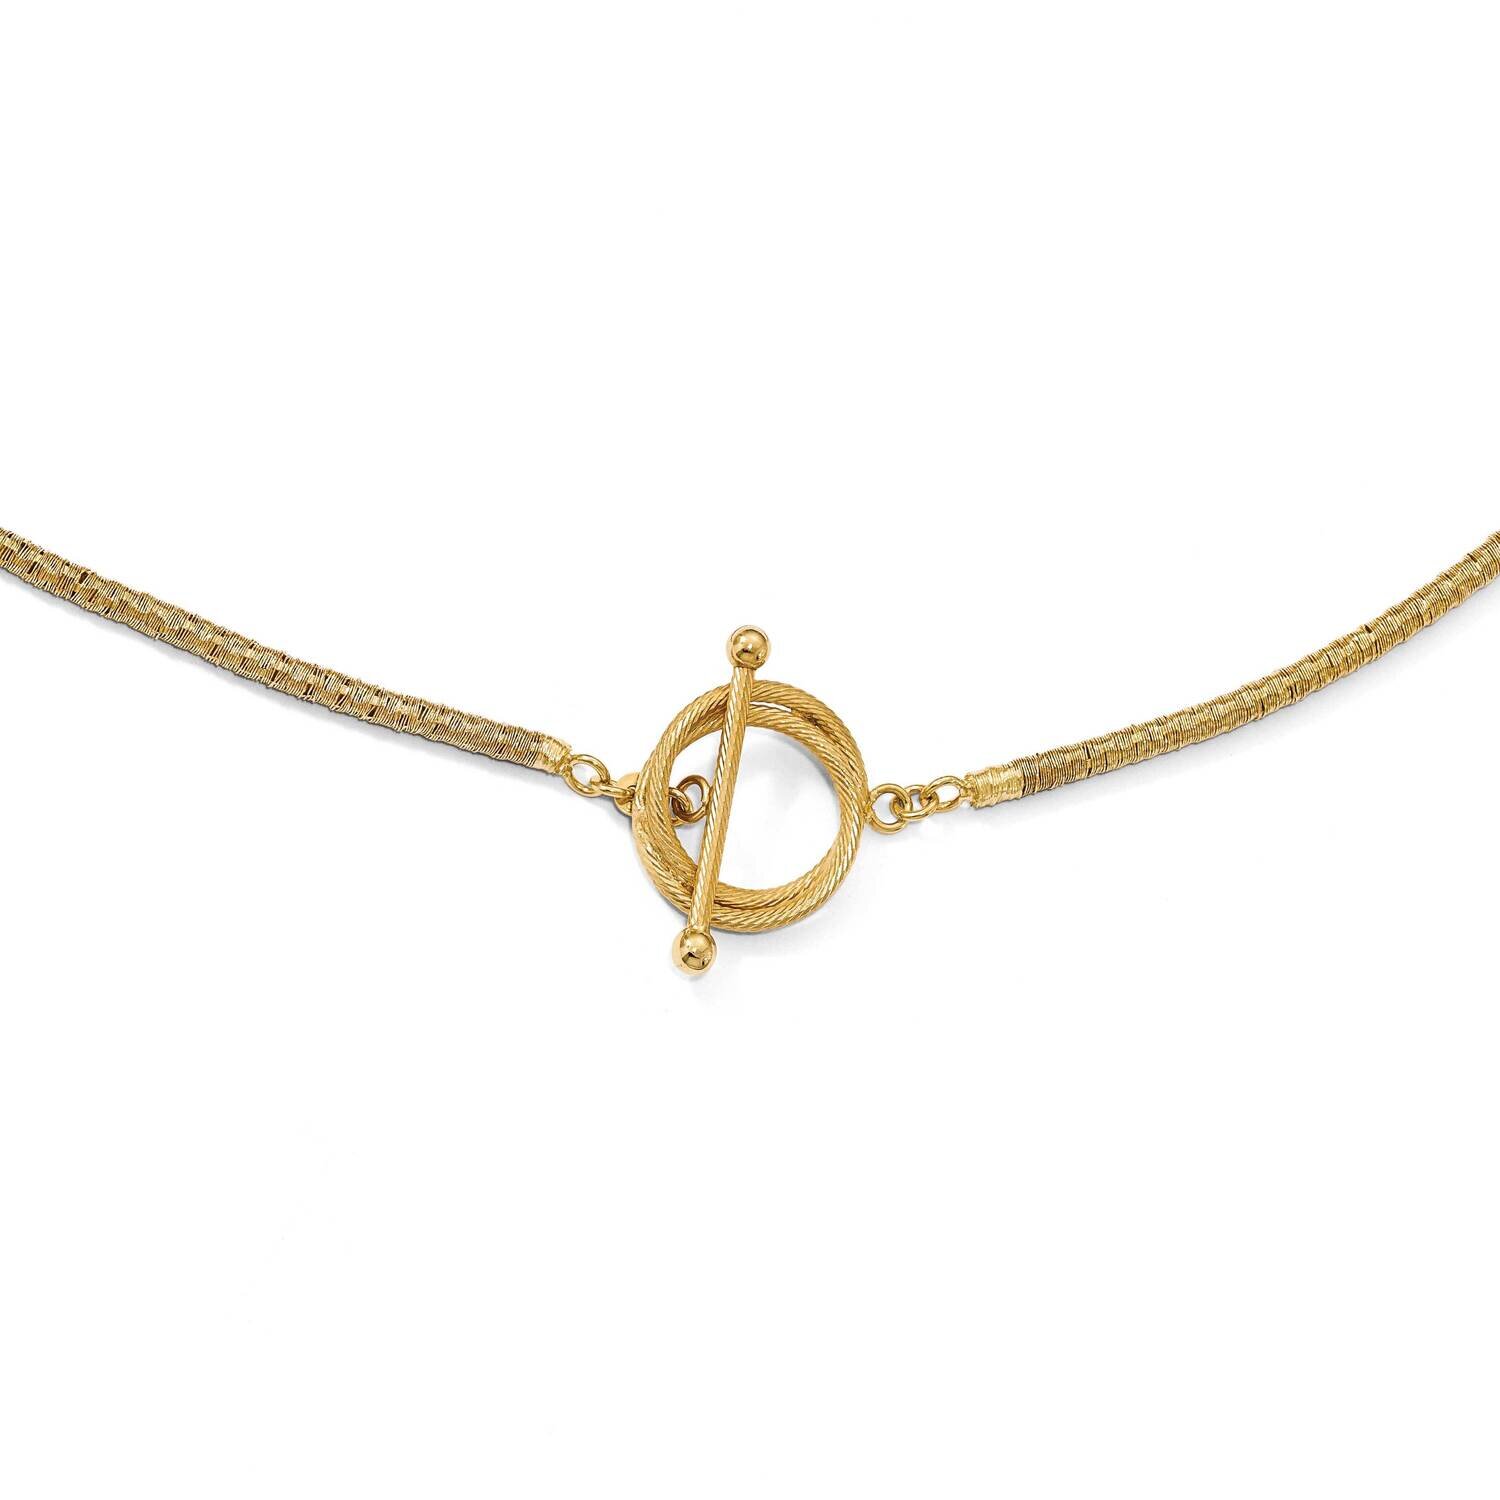 Gold-Plated Diamond-Cut Toggle Bracelet/Necklace Sterling Silver QLF850-34